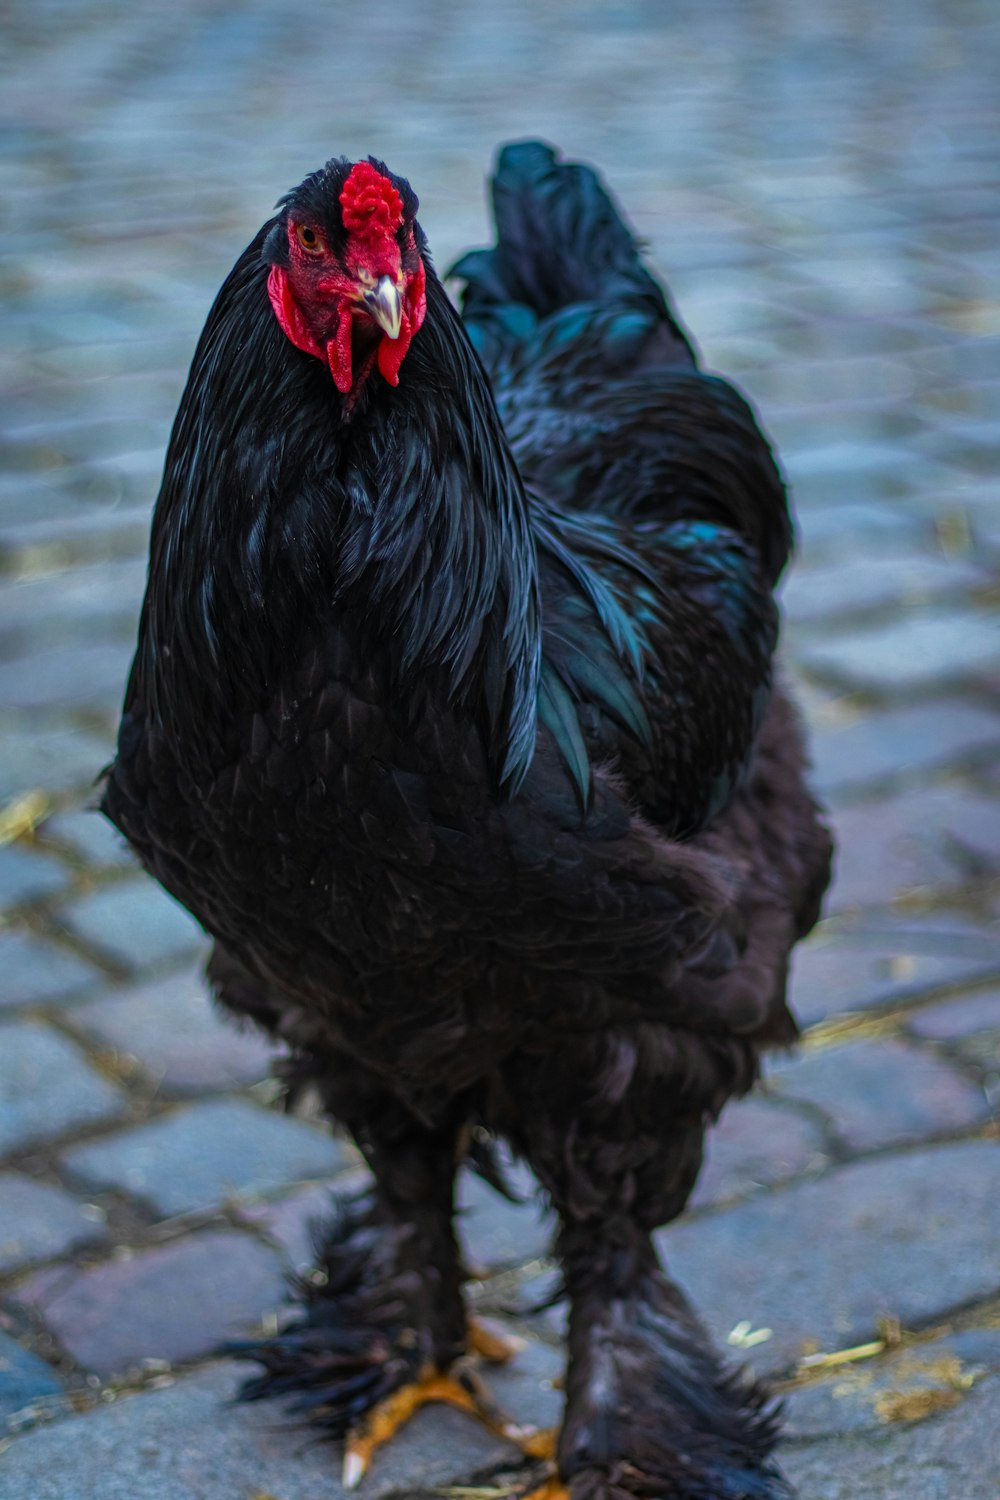 black and red rooster on brown brick floor